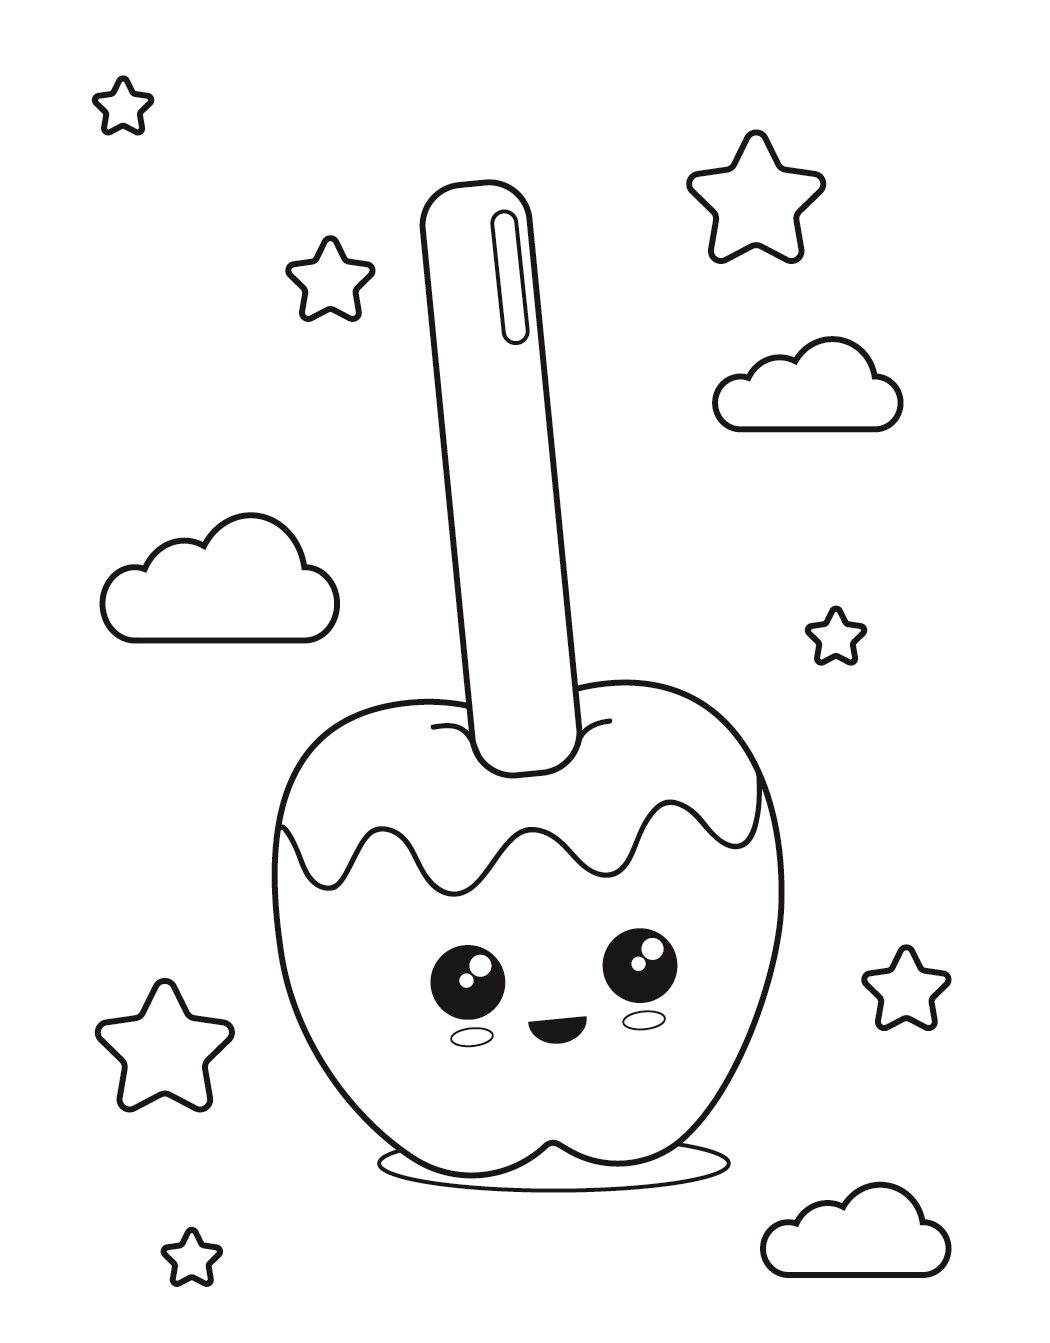 Candy Coloring Pages for Adults and Kids